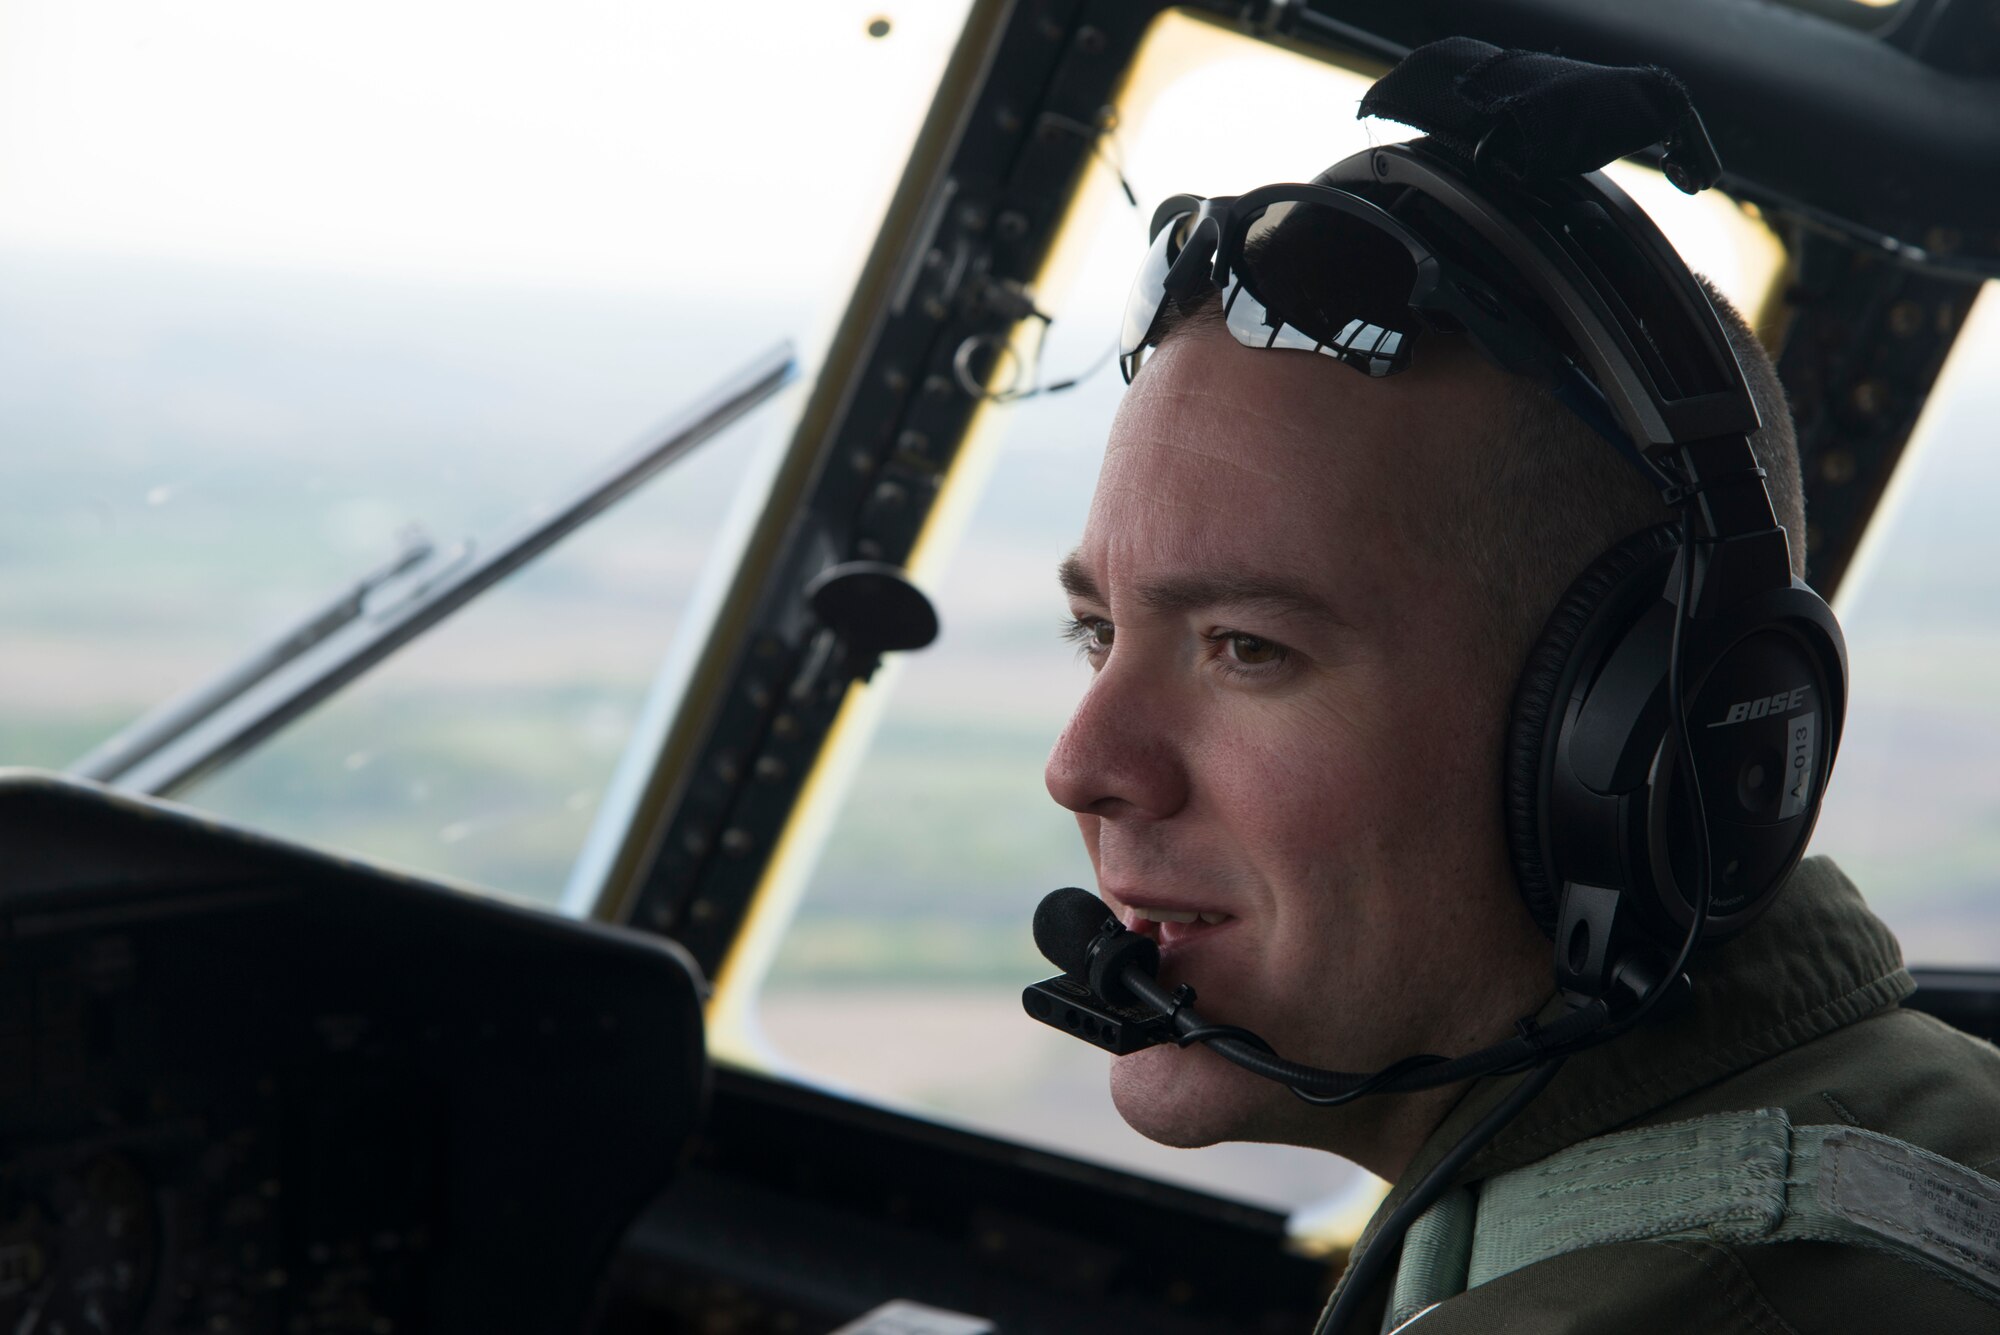 Capt. Mike McFadden, 96th Airlift Squadron pilot, piloted a U.S. Air Force C-130 during a flyover in Minnesota, May 13, 2020. The 934th Airlift Wing along with the Minnesota National Guard’s 133rd Airlift Wing flew statewide flyovers in recognition of those on the frontlines of the COVID-19 pandemic response as part of Operation American Resolve. (U.S. Air Force photo by Chris Farley)